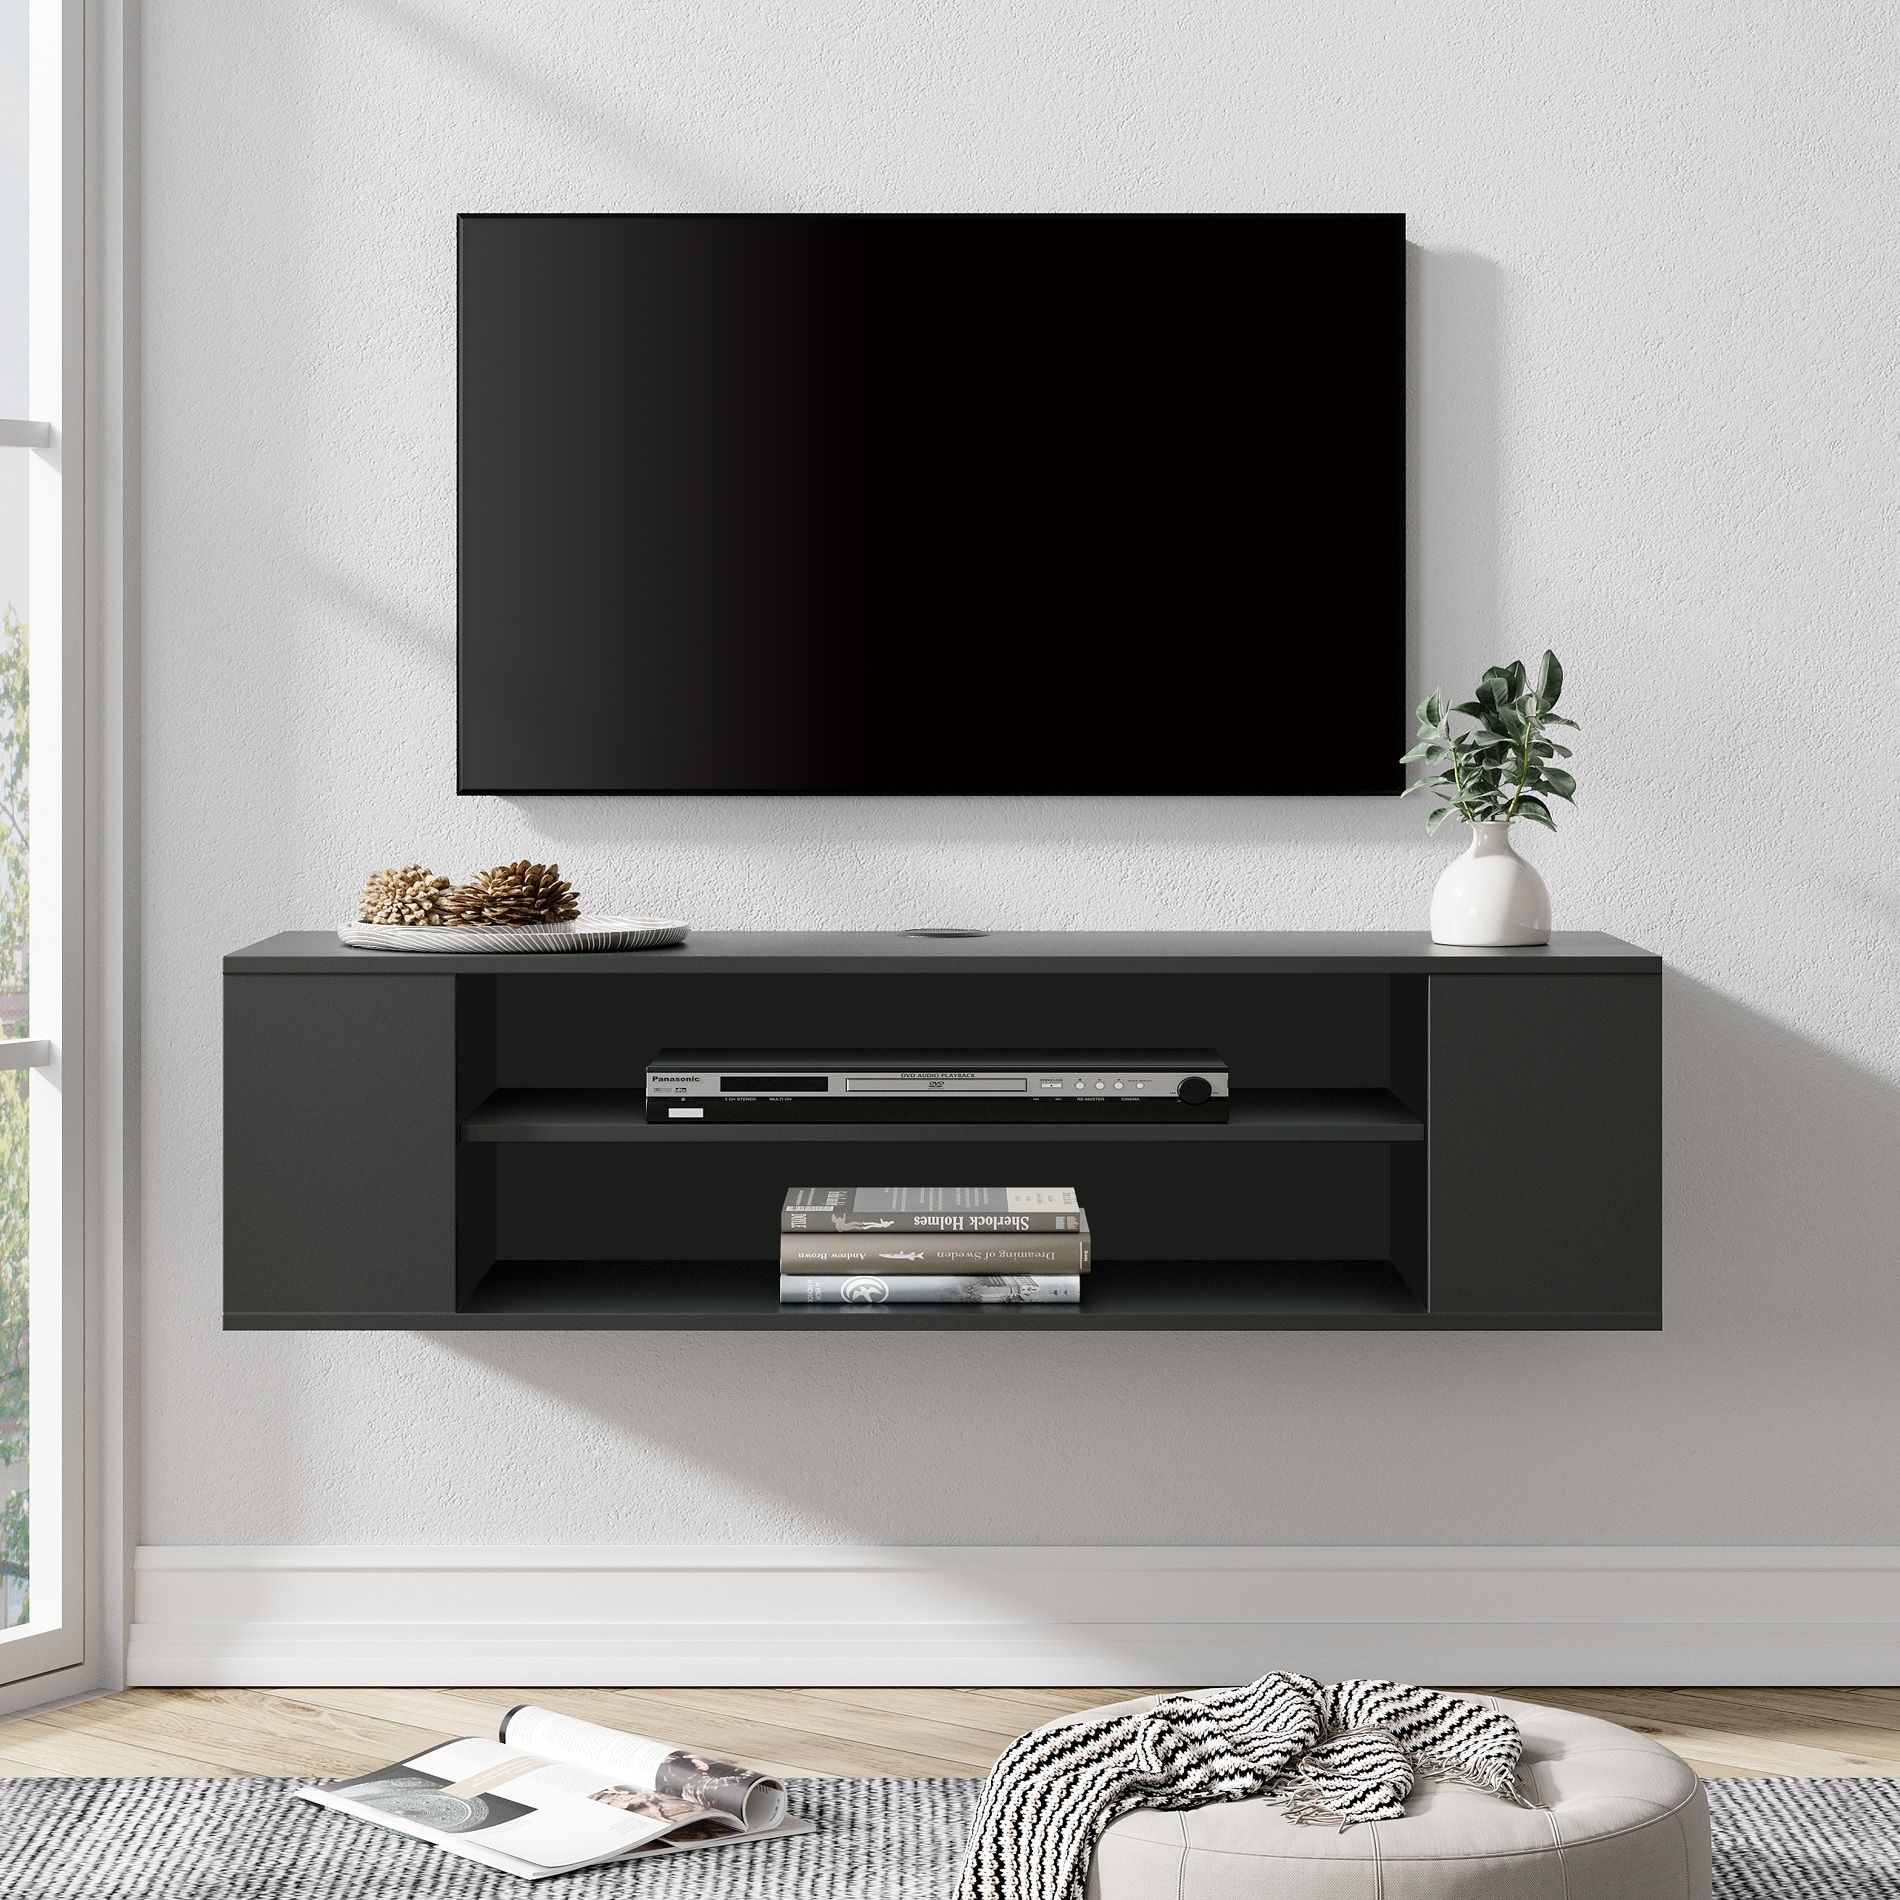 3 Tier Floating Tv Stand With Adjustable Shelves For Living Room, Black –  On Sale – Bed Bath & Beyond – 37782549 With Tier Stands For Tvs (View 8 of 15)